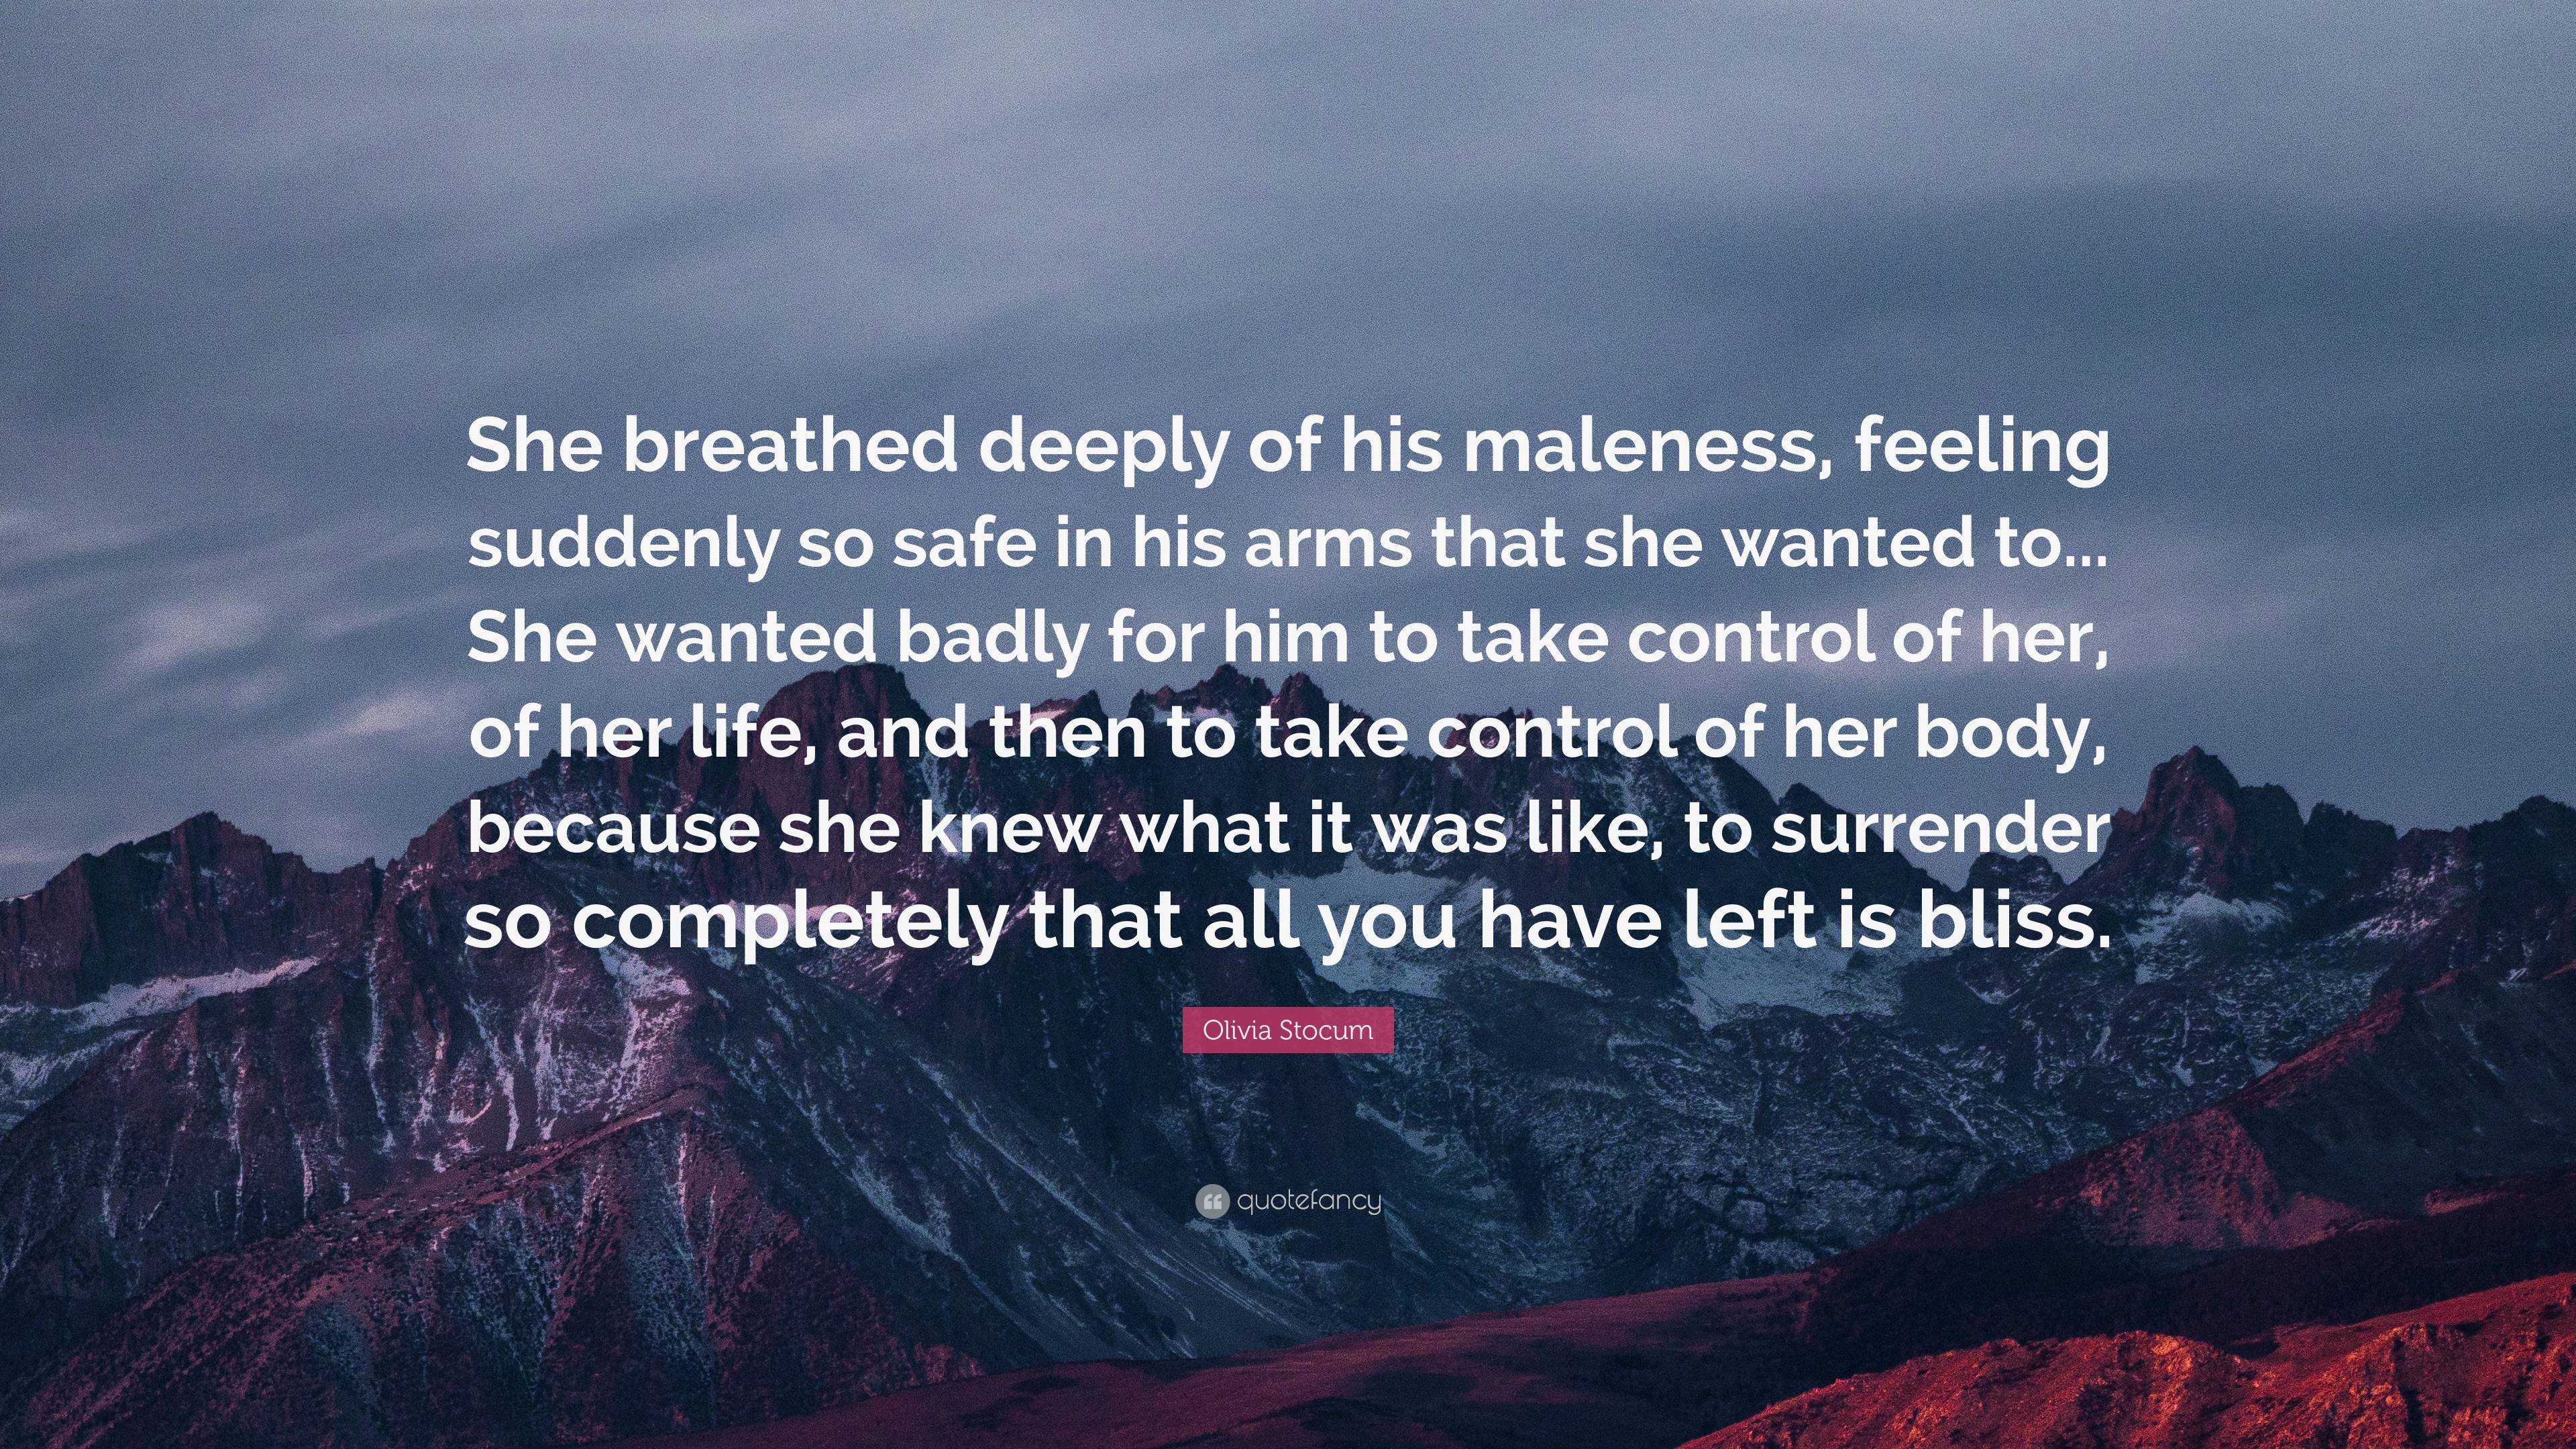 Olivia Stocum Quote: “She breathed deeply of his maleness, feeling ...